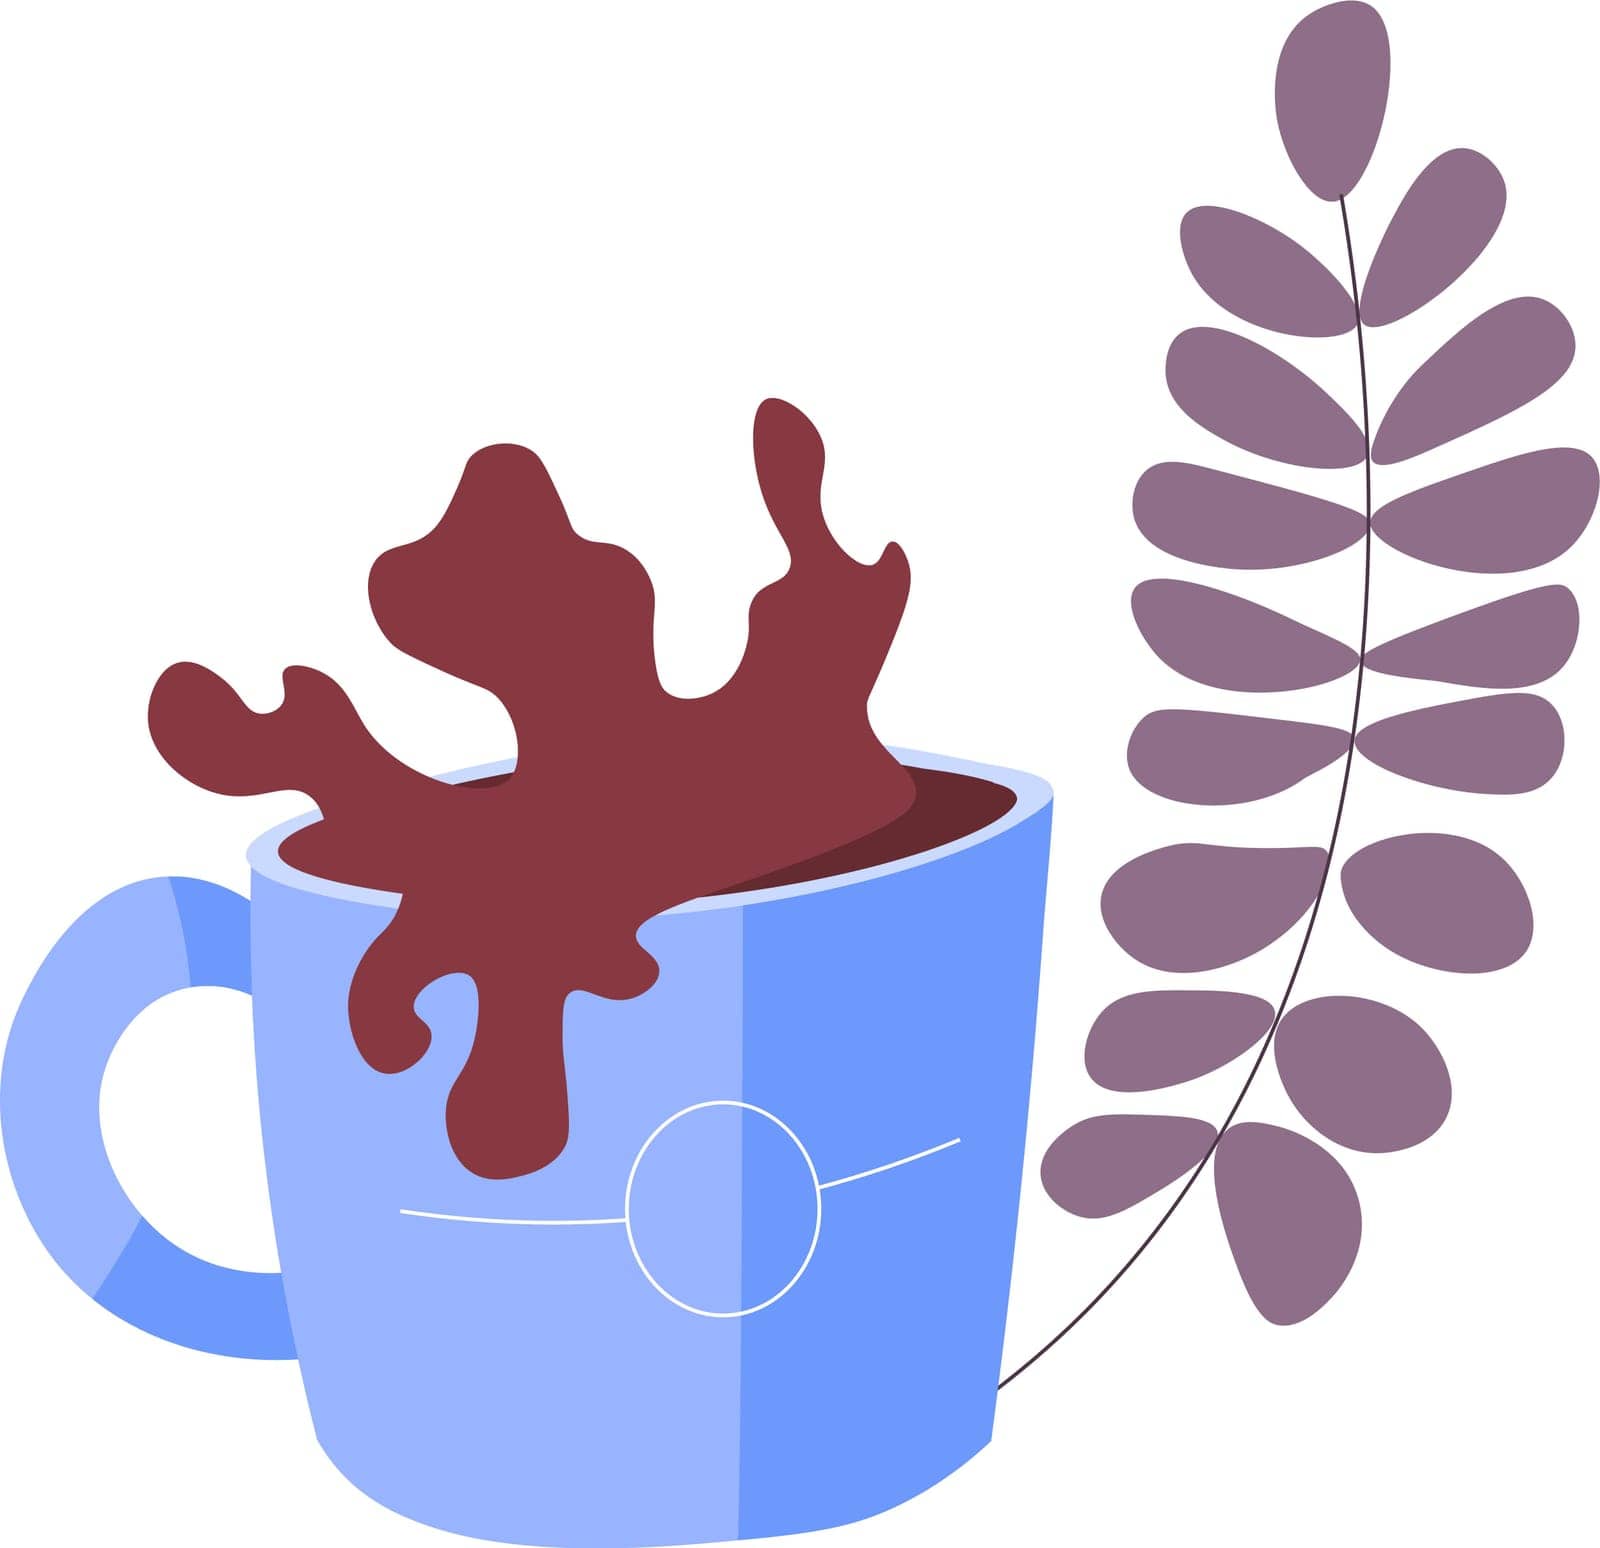 Cup of coffee or hot chocolate, splashes vector by Sonulkaster